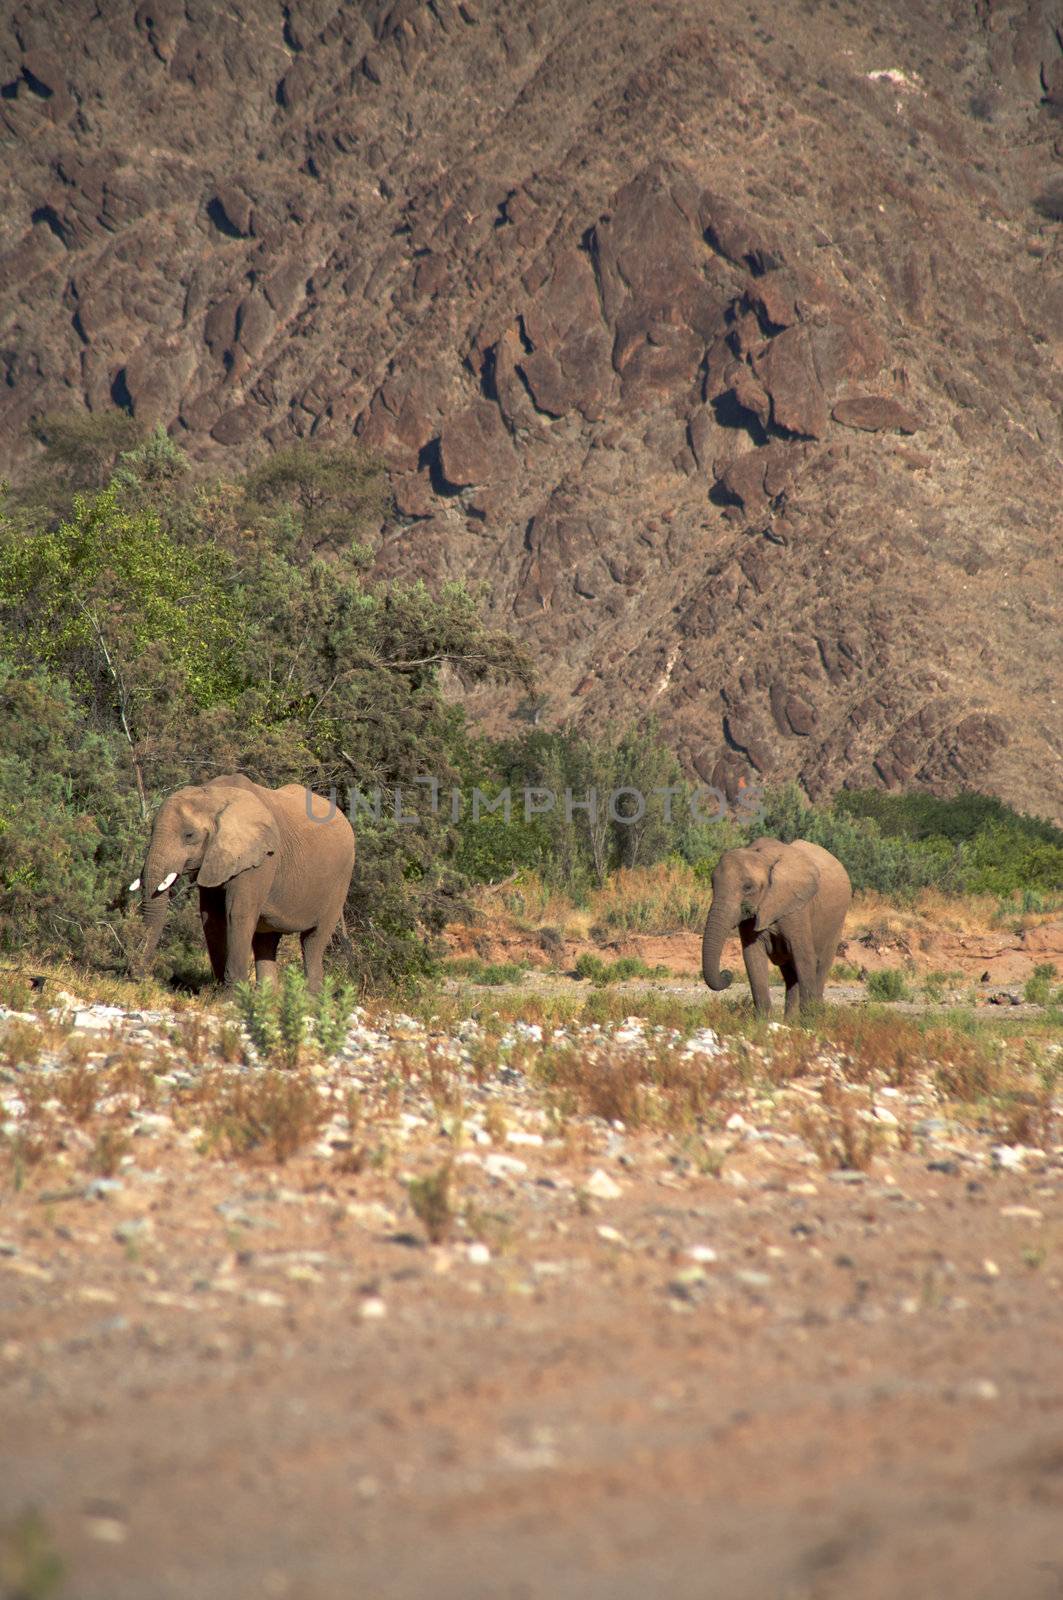 Group of elephants eating in a river bed in the Skeleton Coast Desert, Namibia